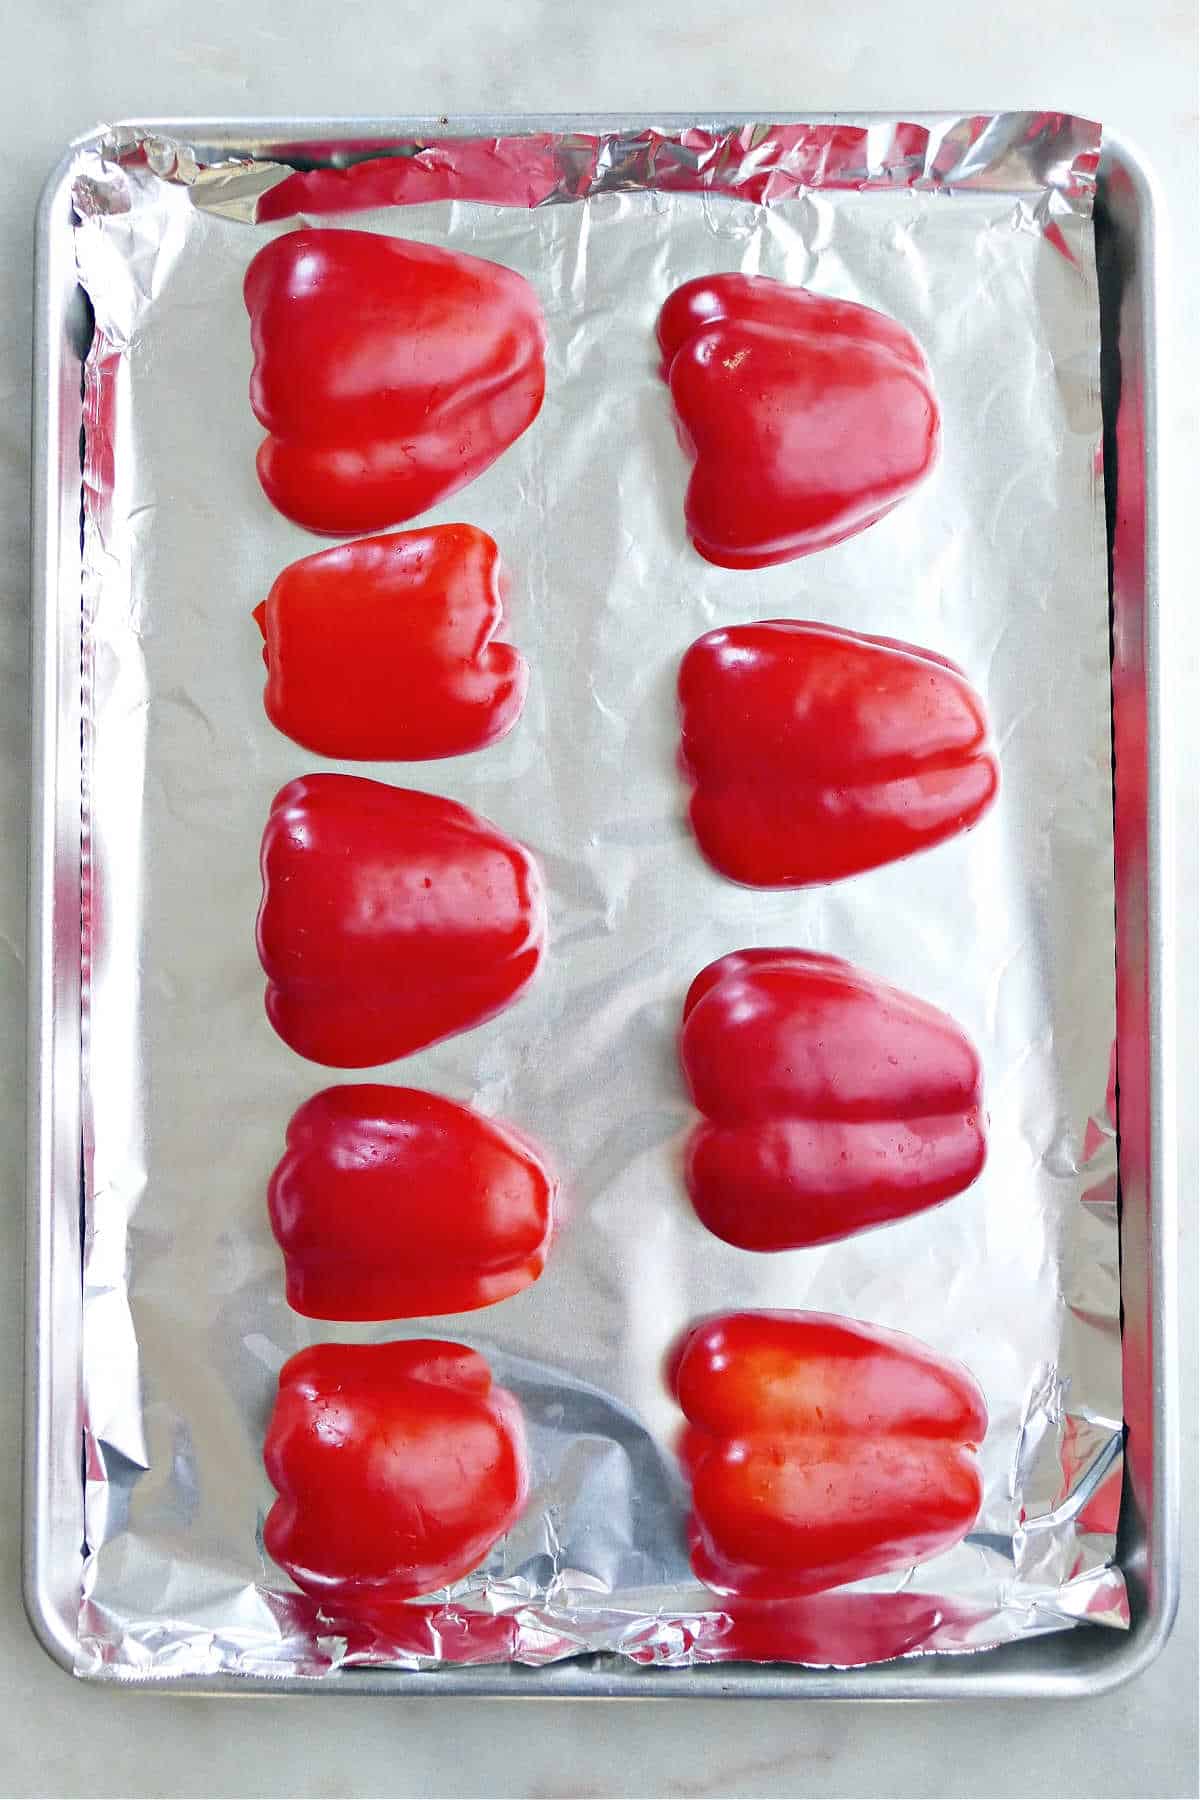 Easy Roasted Red Peppers